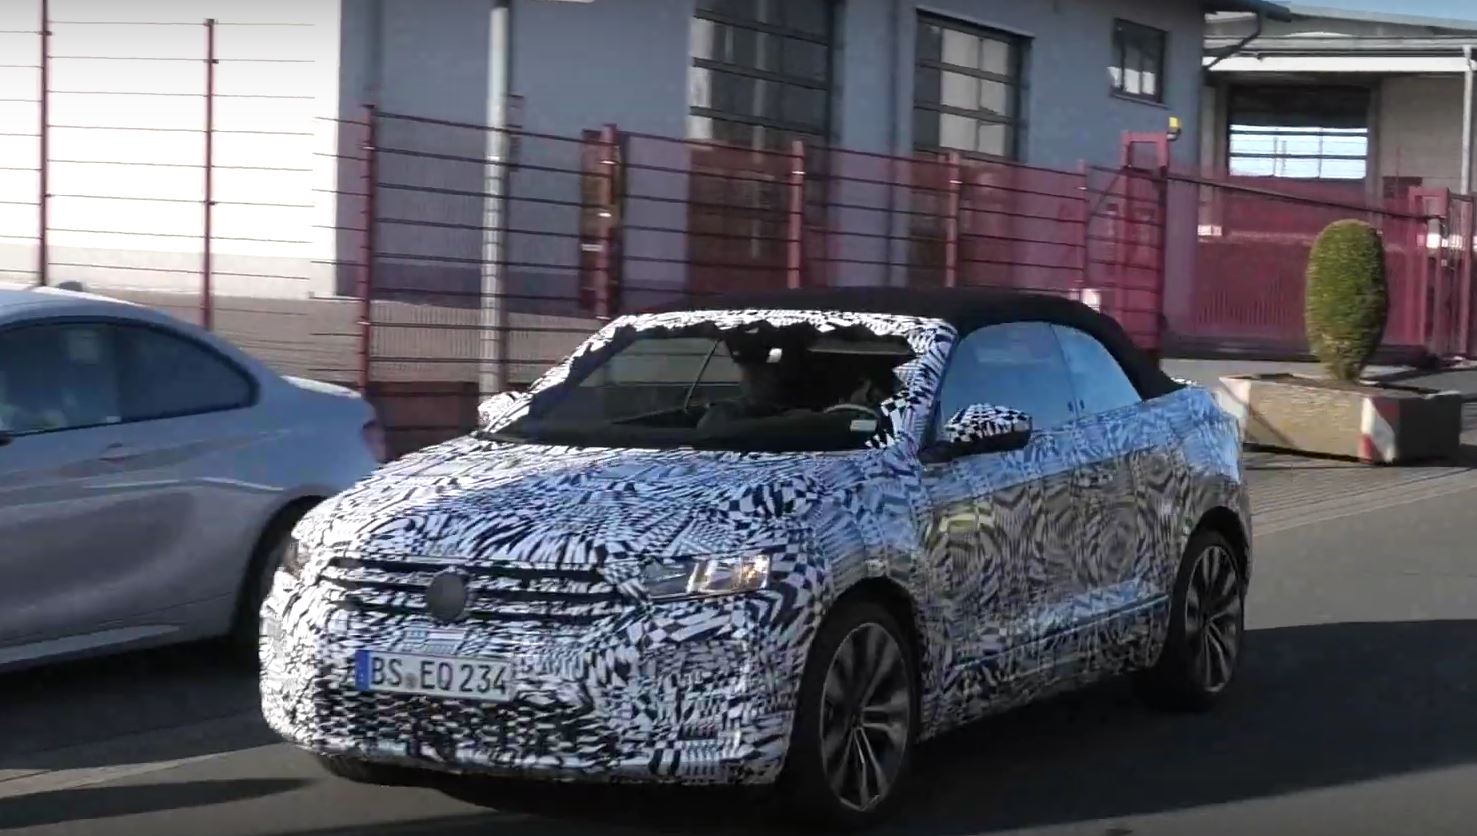 Facelifted VW T-Roc Cabriolet Spied Undisguised Showing Fresh